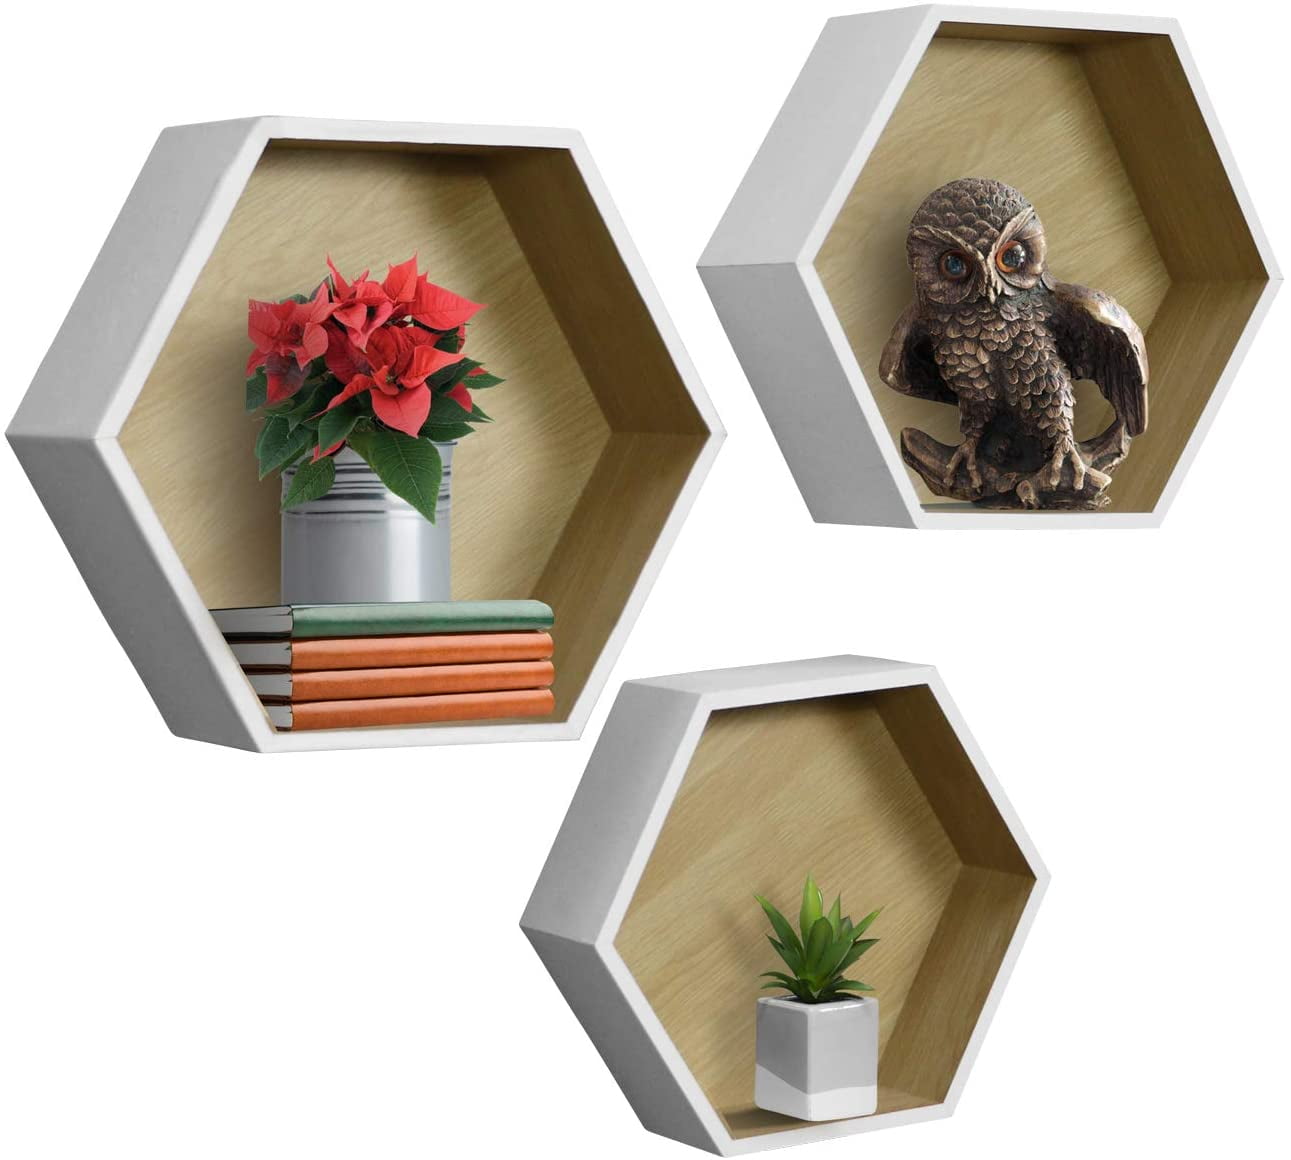 Photos Frames Plants and More Forart Plastic Floating Shelf Hexagon Wall Mounted Shelves Geometric Wall Shelf Decorative Hanging Display for Collectibles